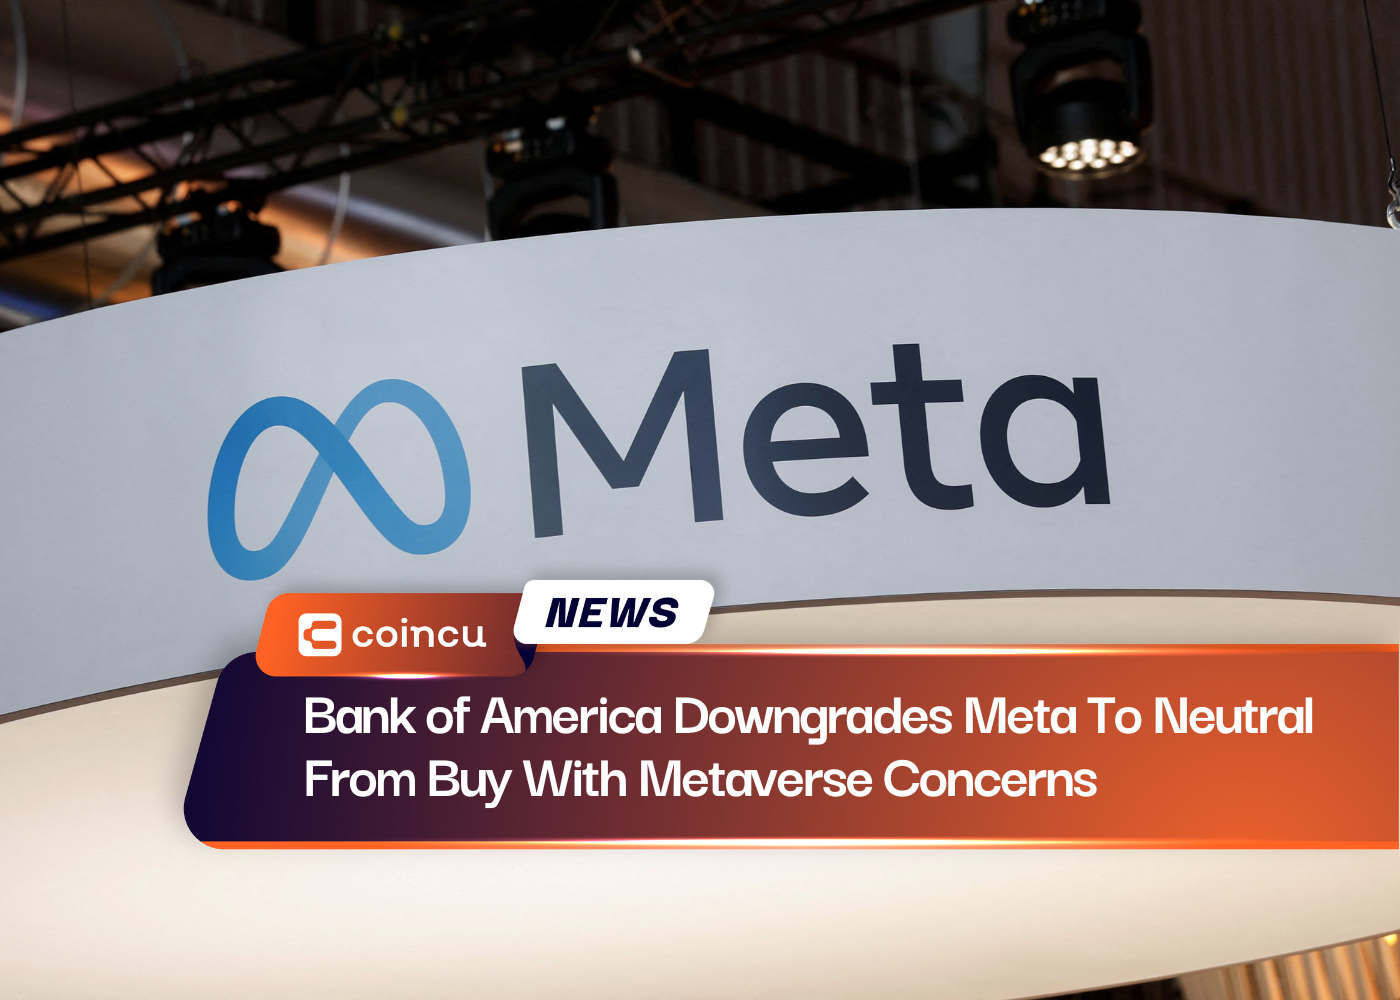 Bank of America Downgrades Meta To Neutral From Buy With Metaverse Concerns